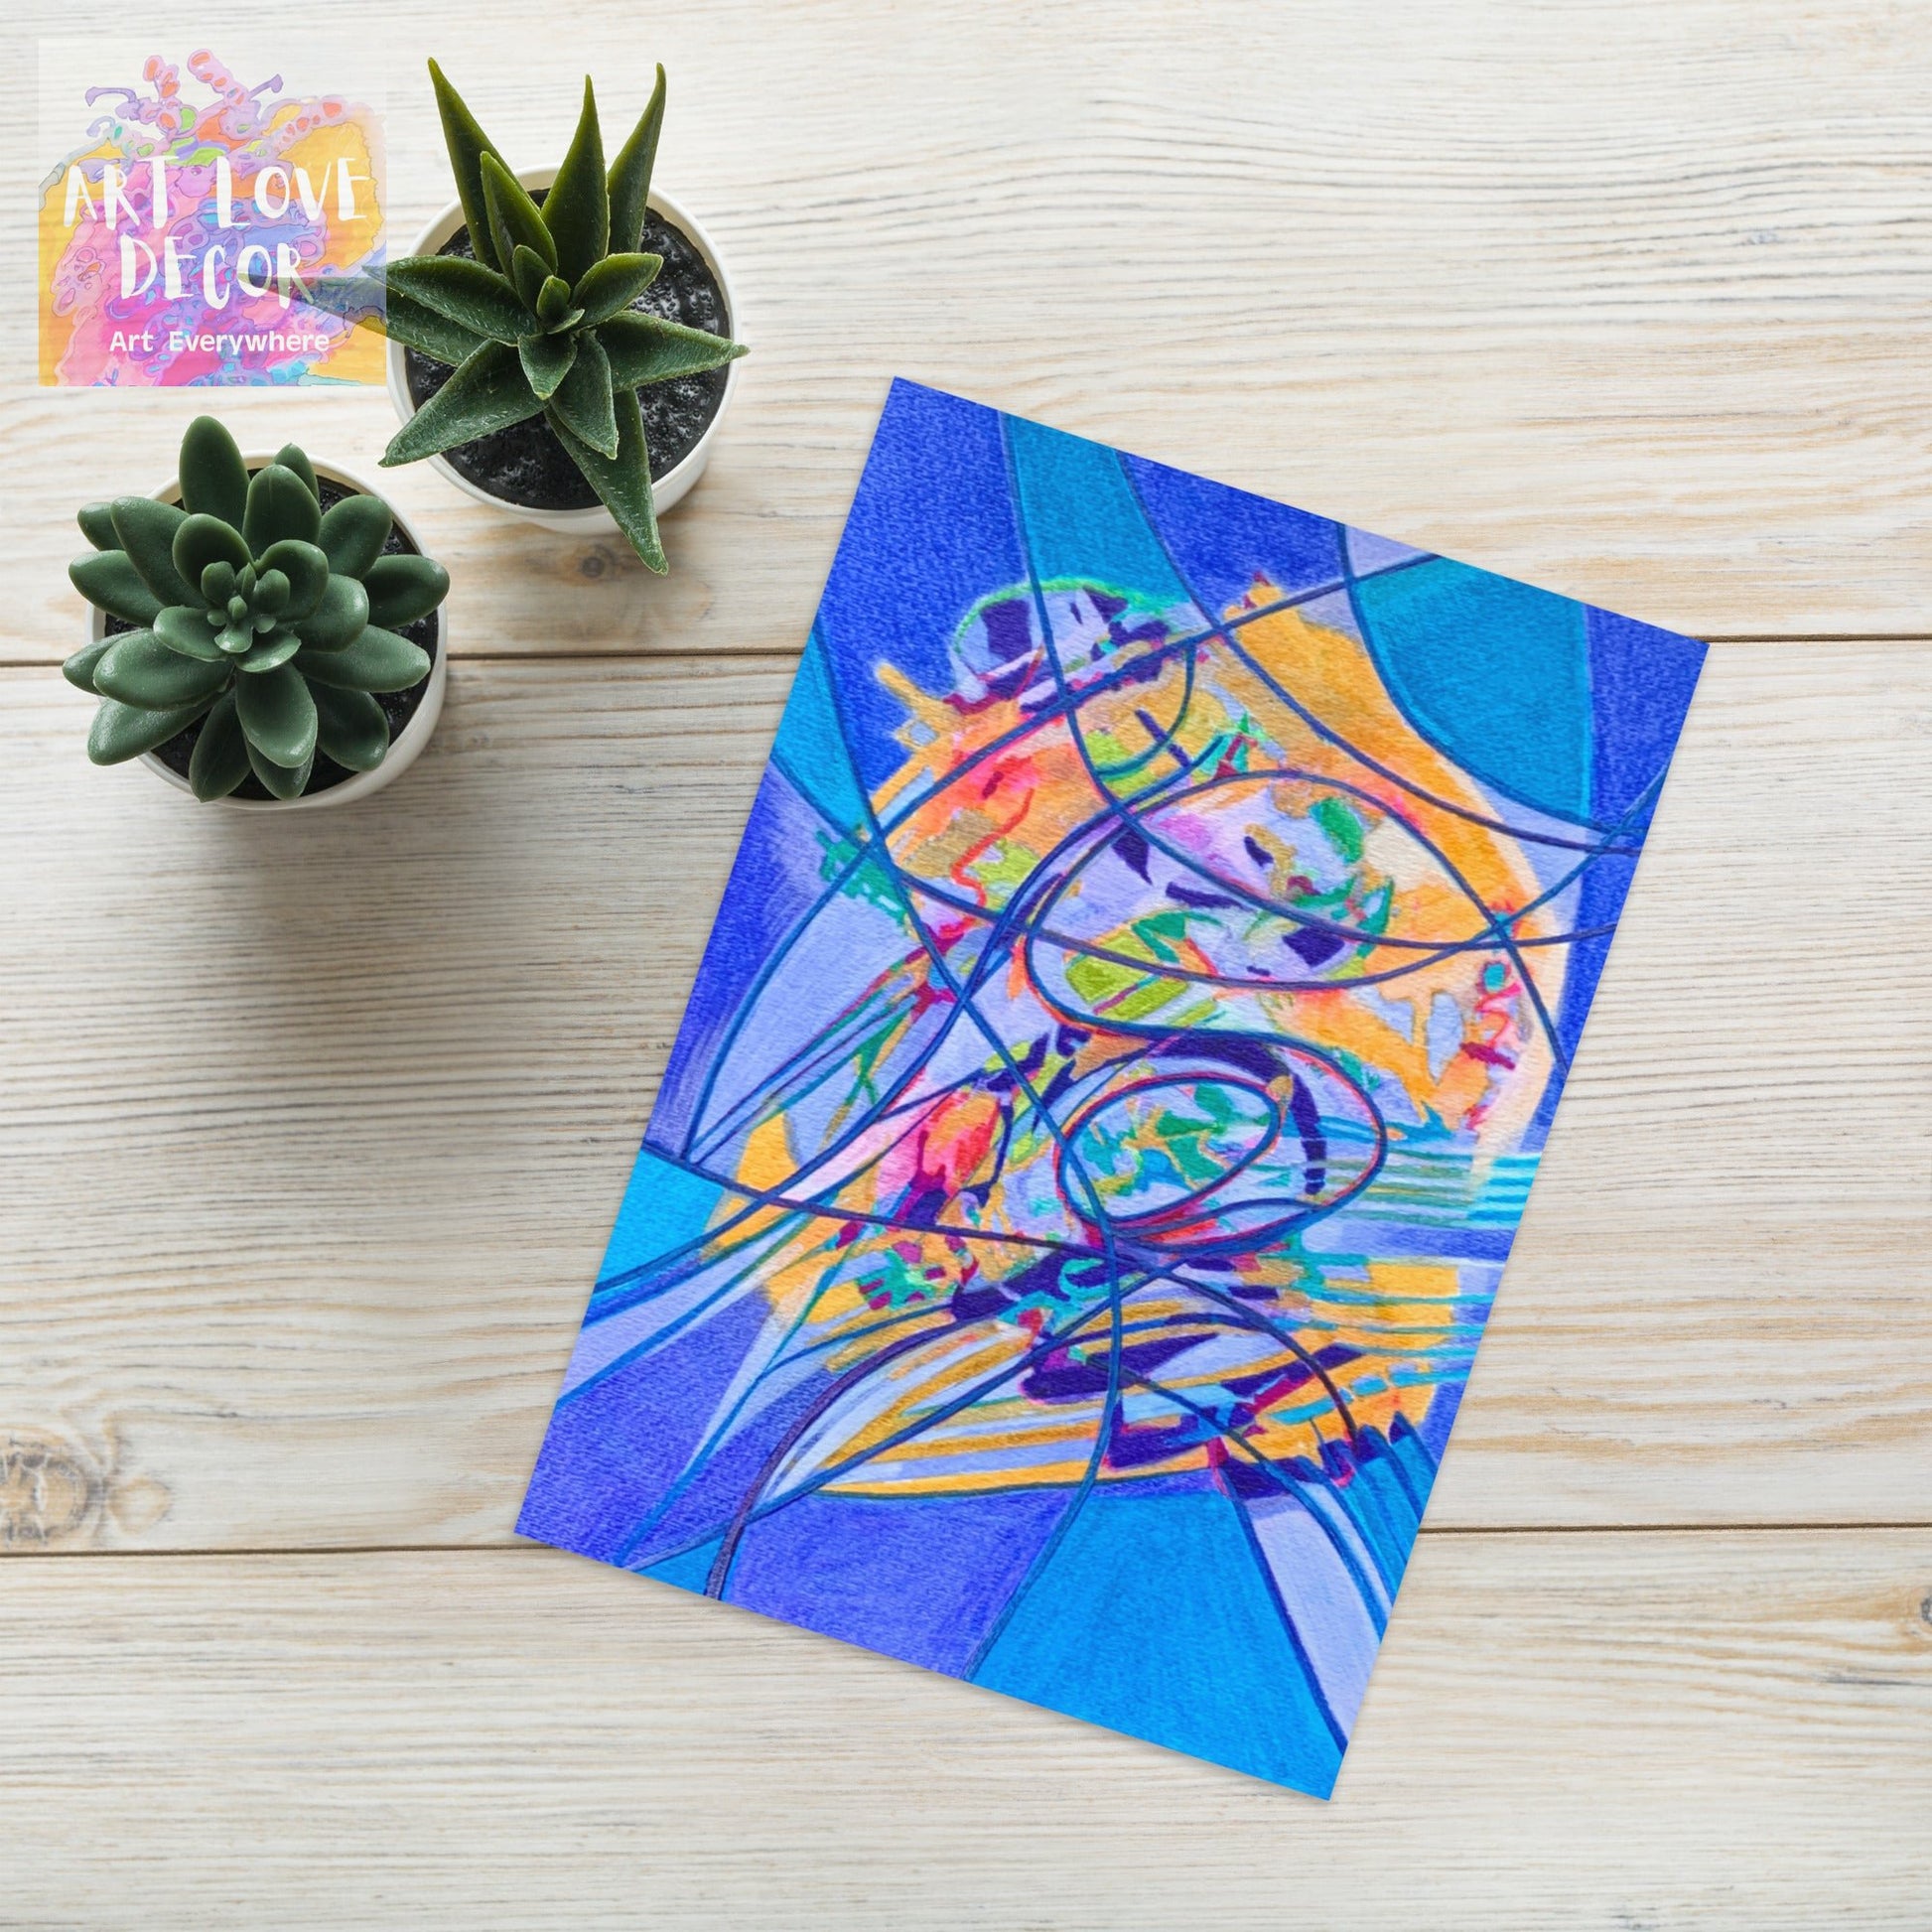 Opportunities Abstract Greeting card - Art Love Decor